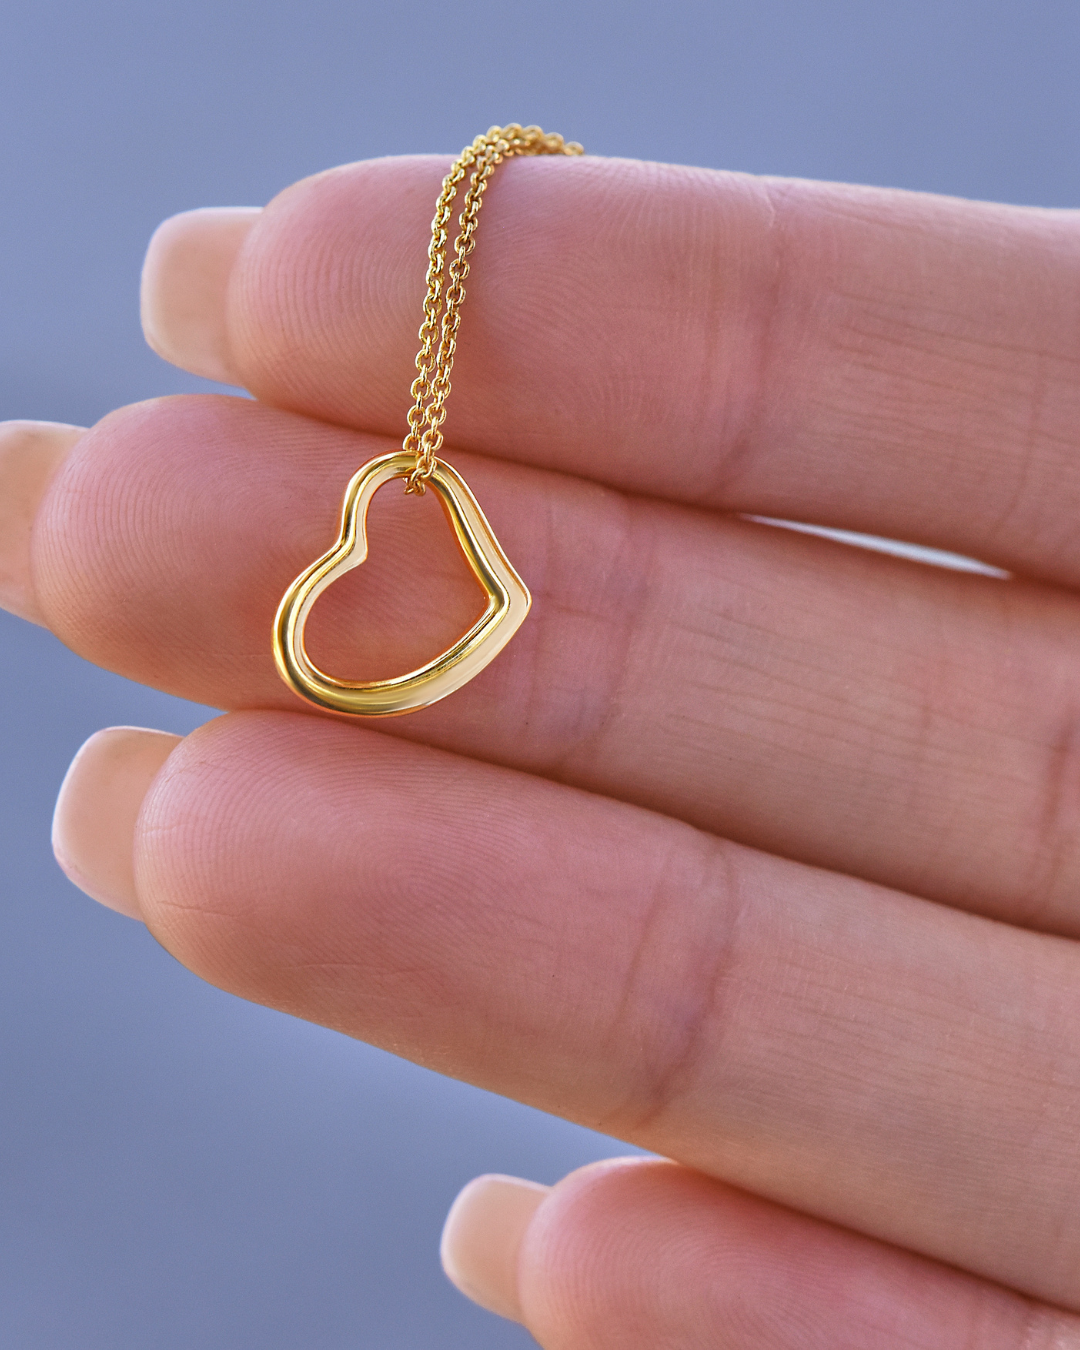 Buy Dainty Gold Heart Necklace, Thin Open Heart Pendant, 14K Gold Layering  Chain, Minimalist, Gift for Her, Cable Chain, Everyday Jewelry Online in  India - Etsy